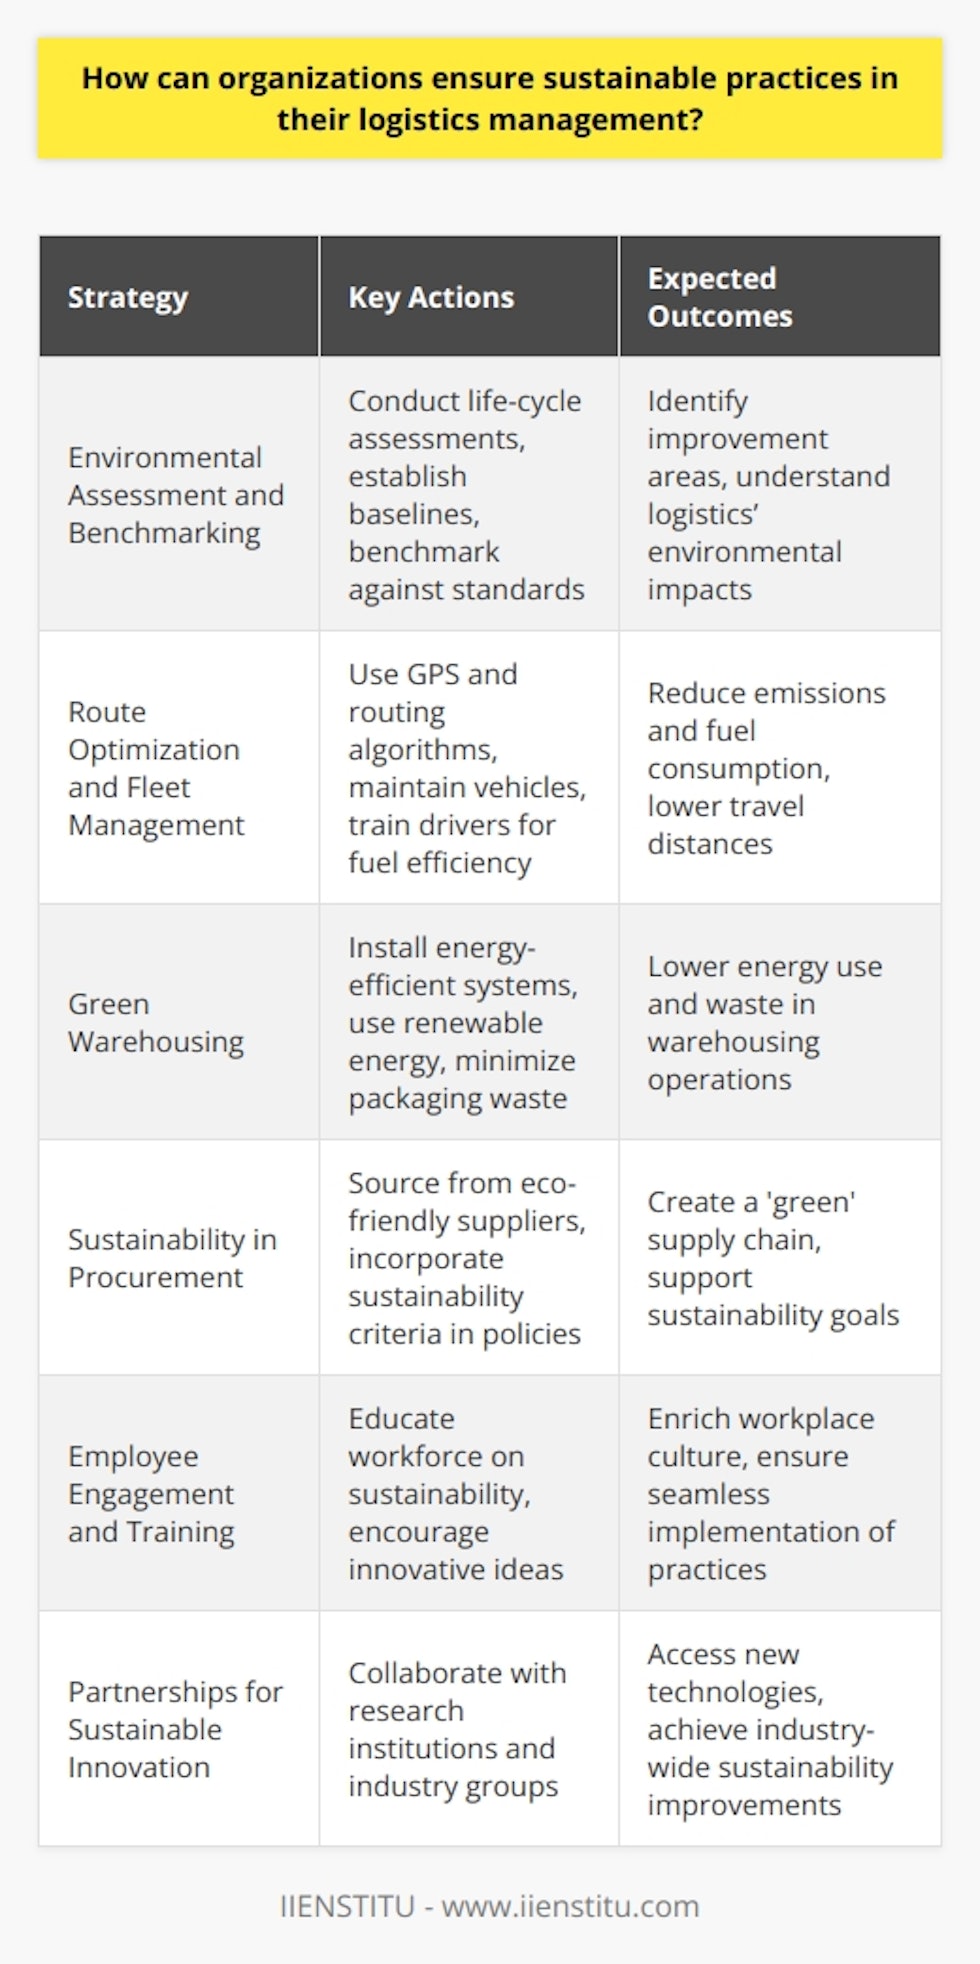 Sustainable logistics management is a multifaceted challenge that requires organizations to take deliberate and strategic actions to minimize negative environmental impacts while maintaining operational efficiency. Ensuring sustainability in logistics can lead to long-term financial, social, and environmental benefits. Here are some key strategies organizations can adopt to enhance sustainability in their logistics operations:Environmental Assessment and Benchmarking:Organizations should start with a thorough assessment of their logistics and supply chain's environmental impact. This involves conducting life-cycle assessments to understand the carbon footprint, waste production, and resource consumption of their logistics activities. After establishing a baseline, organizations can benchmark their performance against industry standards or competitors to identify areas for improvement.Route Optimization and Fleet Management:Implementing advanced route optimization techniques is key in reducing fuel consumption and emissions. Utilizing GPS and sophisticated routing algorithms can minimize unnecessary travel, avoid congestion, and lower the overall distance traveled. Additionally, effective fleet management practices, such as regular vehicle maintenance and driver training to promote fuel-efficient driving habits, can significantly reduce environmental impact.Green Warehousing:Sustainable practices within warehousing operations are essential to reducing energy use and waste. This can be achieved by utilizing energy-efficient lighting and HVAC systems, incorporating solar panels, or optimizing storage designs for more effective space utilization. Green warehousing also involves the reduction of packaging waste through reusable materials and the implementation of waste separation and recycling programs.Sustainability in Procurement:Integrating sustainability criteria into procurement policies is another way to ensure the supply chain's environmental performance. Organizations can source from suppliers who demonstrate a commitment to environmental standards, such as those who hold eco-certifications or publicly disclose their sustainability practices. This procurement approach fosters a 'green' supply chain that supports a company's overall sustainability goals.Employee Engagement and Training:For sustainable logistics practices to be effective, an organization's workforce must be on board. This involves educating and training employees on sustainable practices and the reasons behind them. Employees can often provide innovative ideas for improvements, and their engagement is critical for the seamless implementation of new sustainability initiatives.Partnerships for Sustainable Innovation:Organizations should seek out partnerships with research institutions, industry groups, or others focused on sustainability innovation. For example, collaboration with IIENSTITU or similar entities can provide access to new insights, training, and technology that can drive forward sustainability in logistics. Partnerships can also include joining forces with competitors on common sustainability challenges, pooling resources to achieve industry-wide improvements.By undertaking these and other targeted strategies, organizations can effectively incorporate sustainable practices into their logistics management. Not only does this address environmental concerns, but it also offers the potential for operational efficiencies, cost savings, enhanced brand image, and alignment with increasingly rigorous regulations and consumer expectations for responsible corporate conduct.